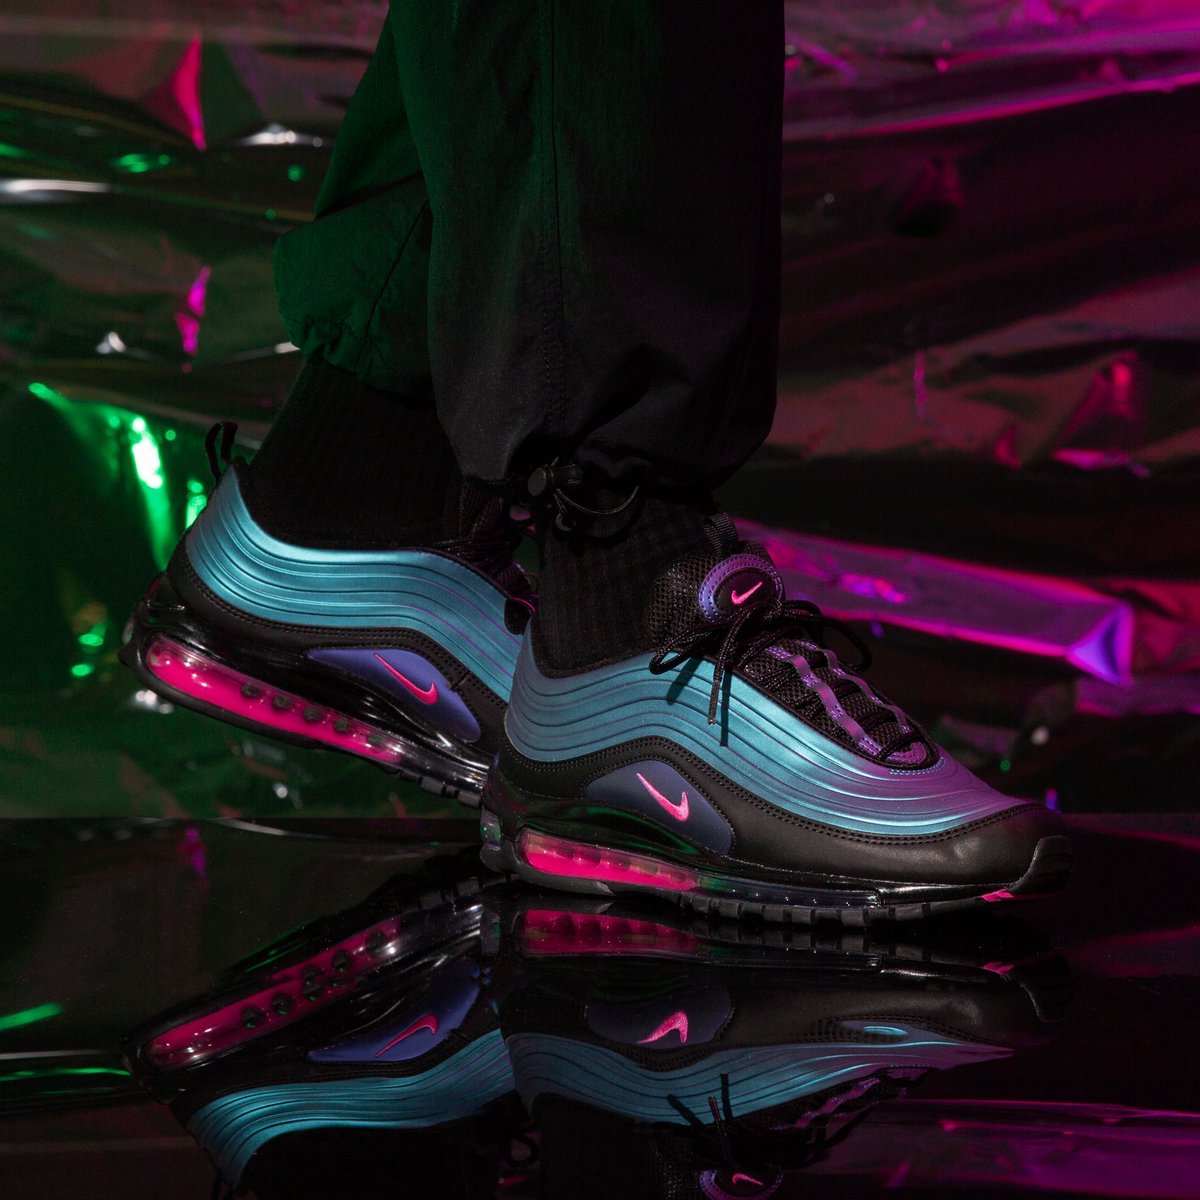 SOLELINKS on Twitter: "Ad: PRICE DROP👇📉 Nike Air Max 97 LX 'Throwback Future' on sale for $136 + FREE shipping, use code =&gt; https://t.co/IrmBXWiSb5 https://t.co/eqChVrxVix" / Twitter